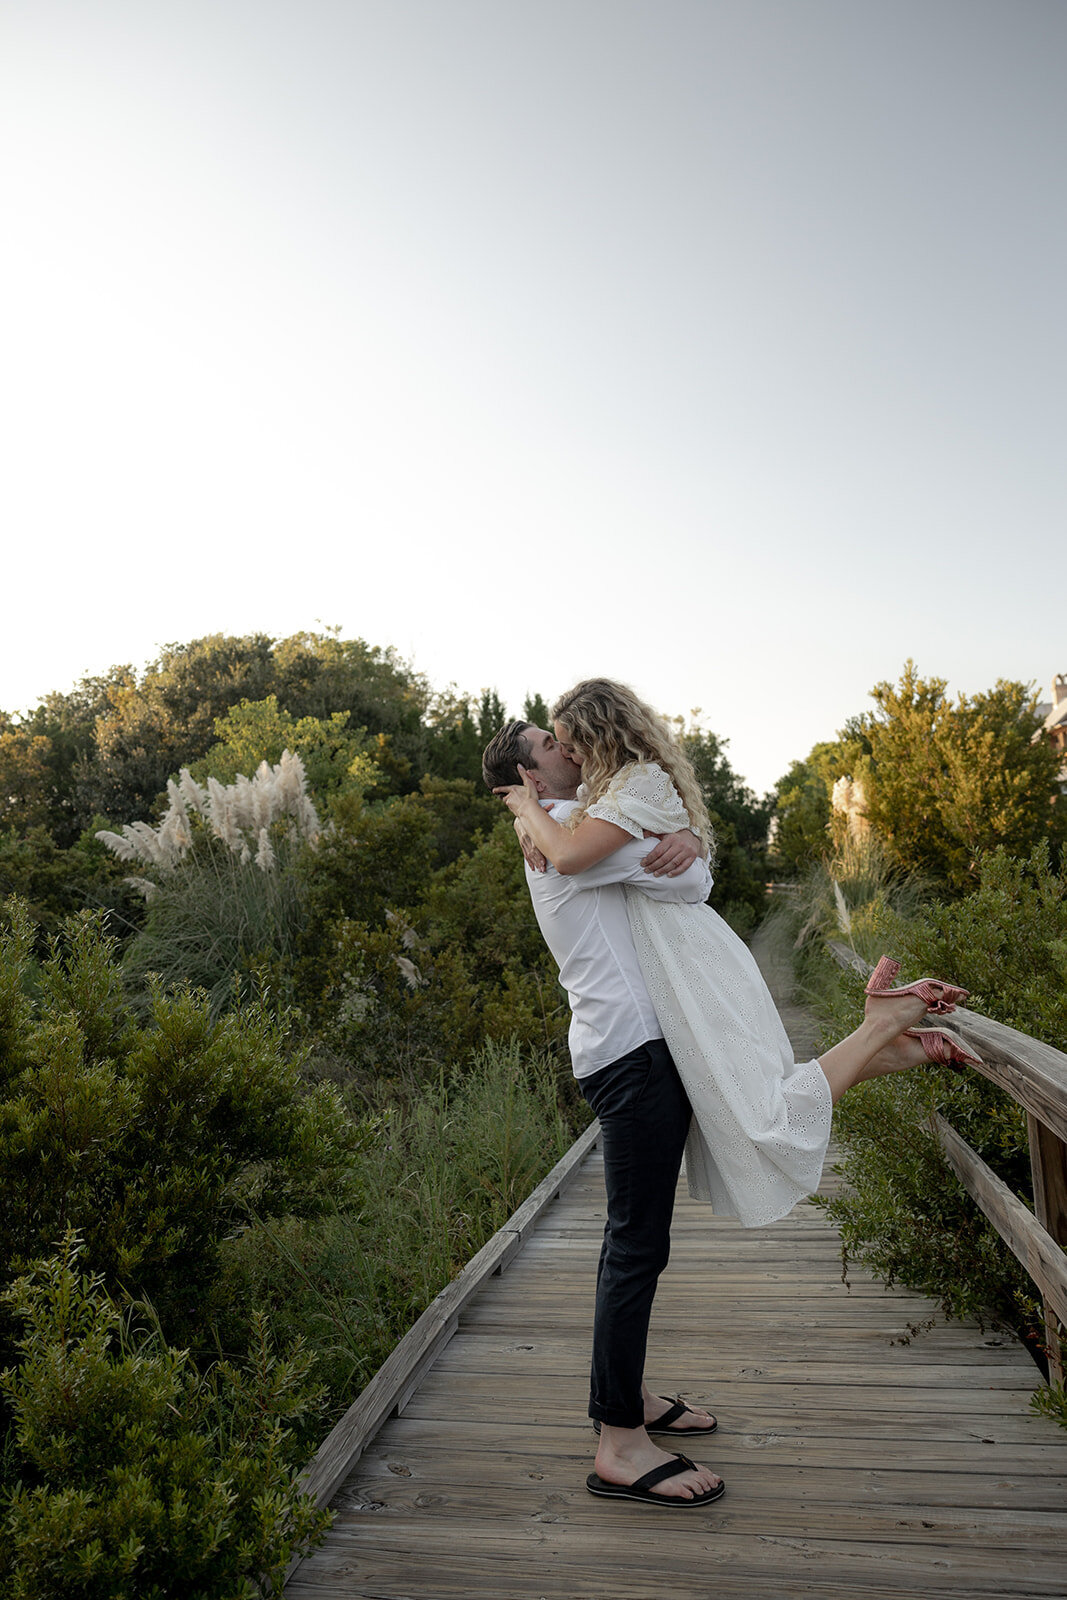 Man lifts up woman in white dress and shares a kiss. Both standing on beach boardwalk with greenery in background.